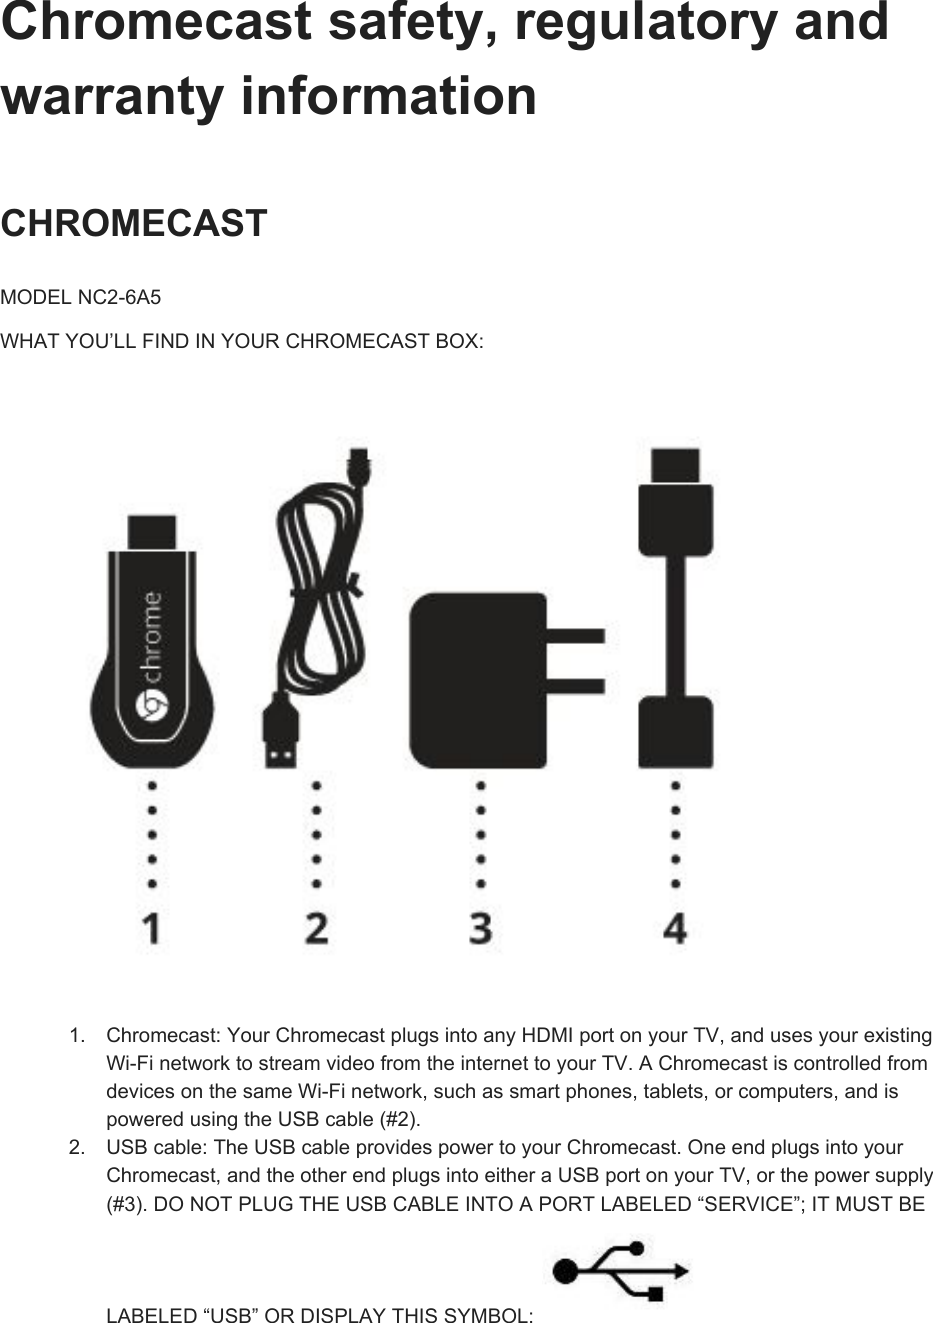 Chromecastsafety,regulatoryandwarrantyinformationCHROMECASTMODELNC26A5WHATYOU’LLFINDINYOURCHROMECASTBOX:1. Chromecast:YourChromecastplugsintoanyHDMIportonyourTV,andusesyourexistingWiFinetworktostreamvideofromtheinternettoyourTV.AChromecastiscontrolledfromdevicesonthesameWiFinetwork,suchassmartphones,tablets,orcomputers,andispoweredusingtheUSBcable(#2).2. USBcable:TheUSBcableprovidespowertoyourChromecast.OneendplugsintoyourChromecast,andtheotherendplugsintoeitheraUSBportonyourTV,orthepowersupply(#3).DONOTPLUGTHEUSBCABLEINTOAPORTLABELED“SERVICE”;ITMUSTBELABELED“USB”ORDISPLAYTHISSYMBOL: 